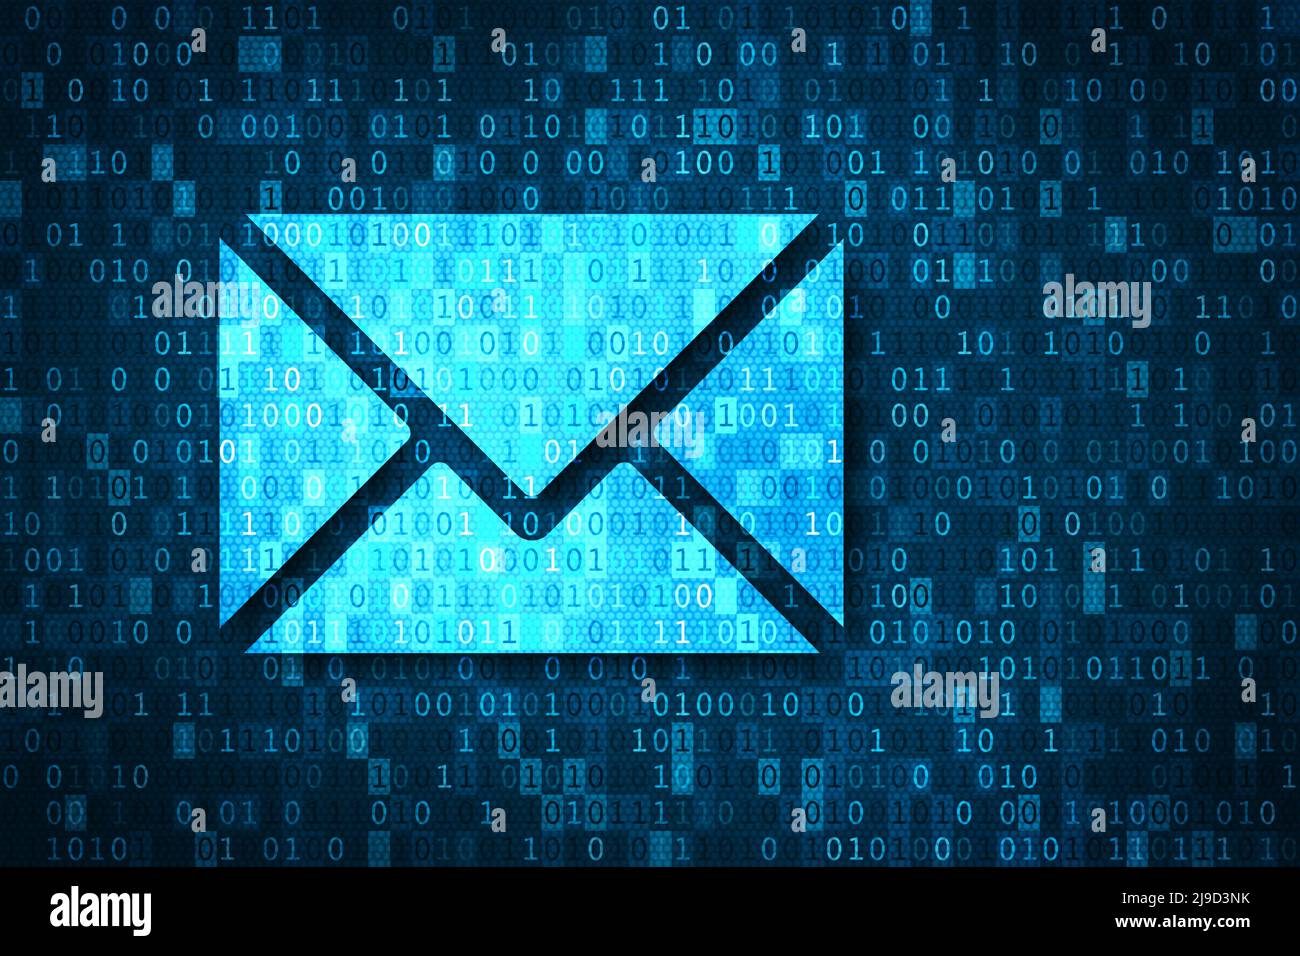 Email and cyber security concept. Phishing, hacking, virus and account theft dangers. Illustration with blue e-mail icon and binary code background. Stock Photo